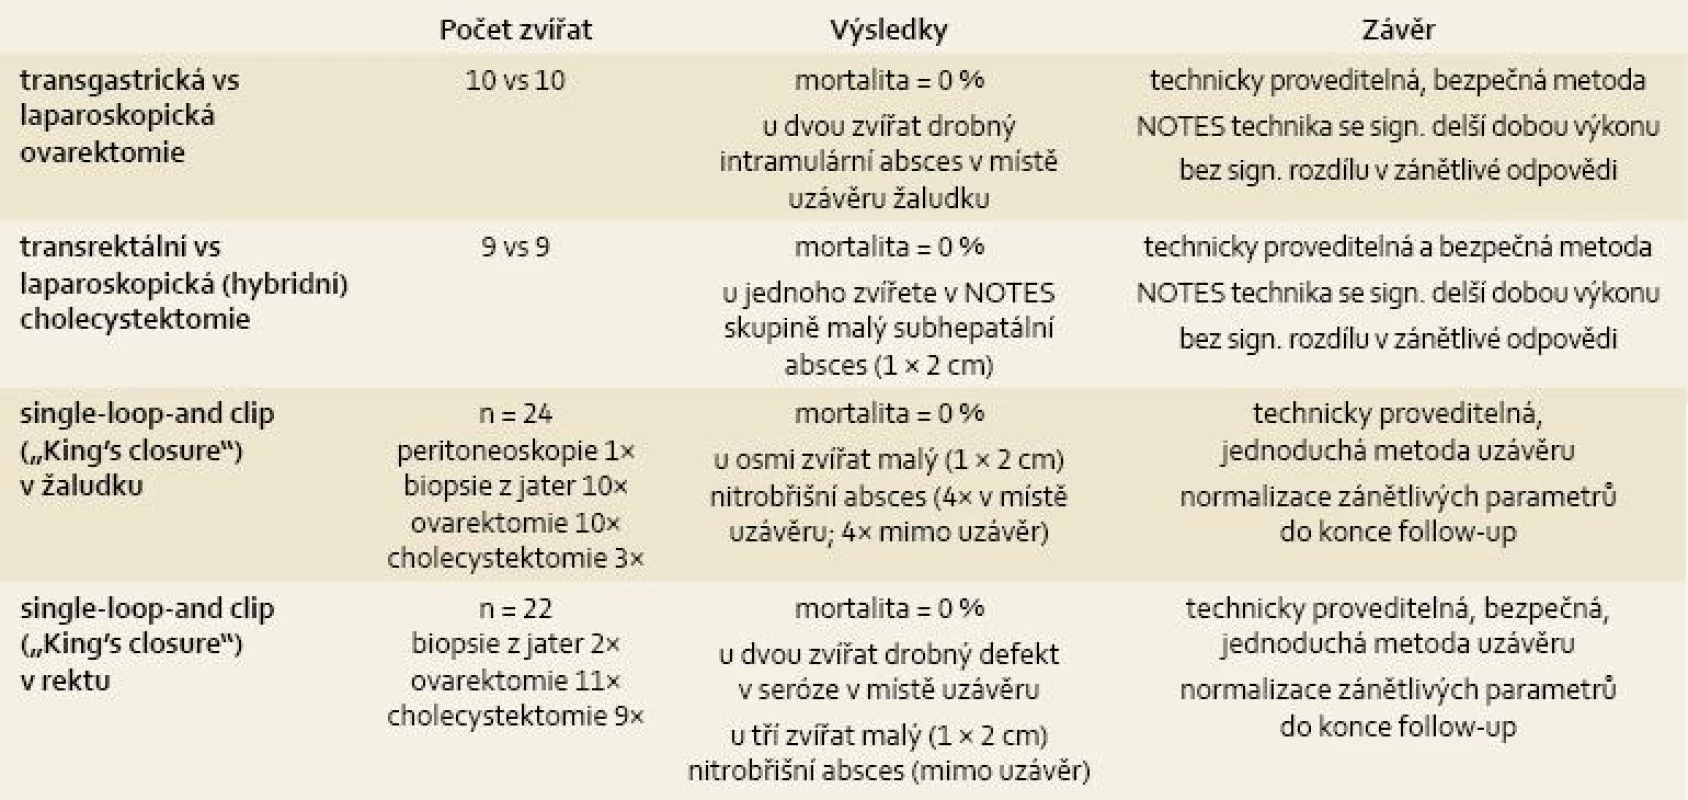 Studie provedené skupinou autorů v rámci projektu NOTES v letech 2009–2011.
Tab. 2. Summary of trials performed by the authors within the NOTES project in the years 2009–2011.